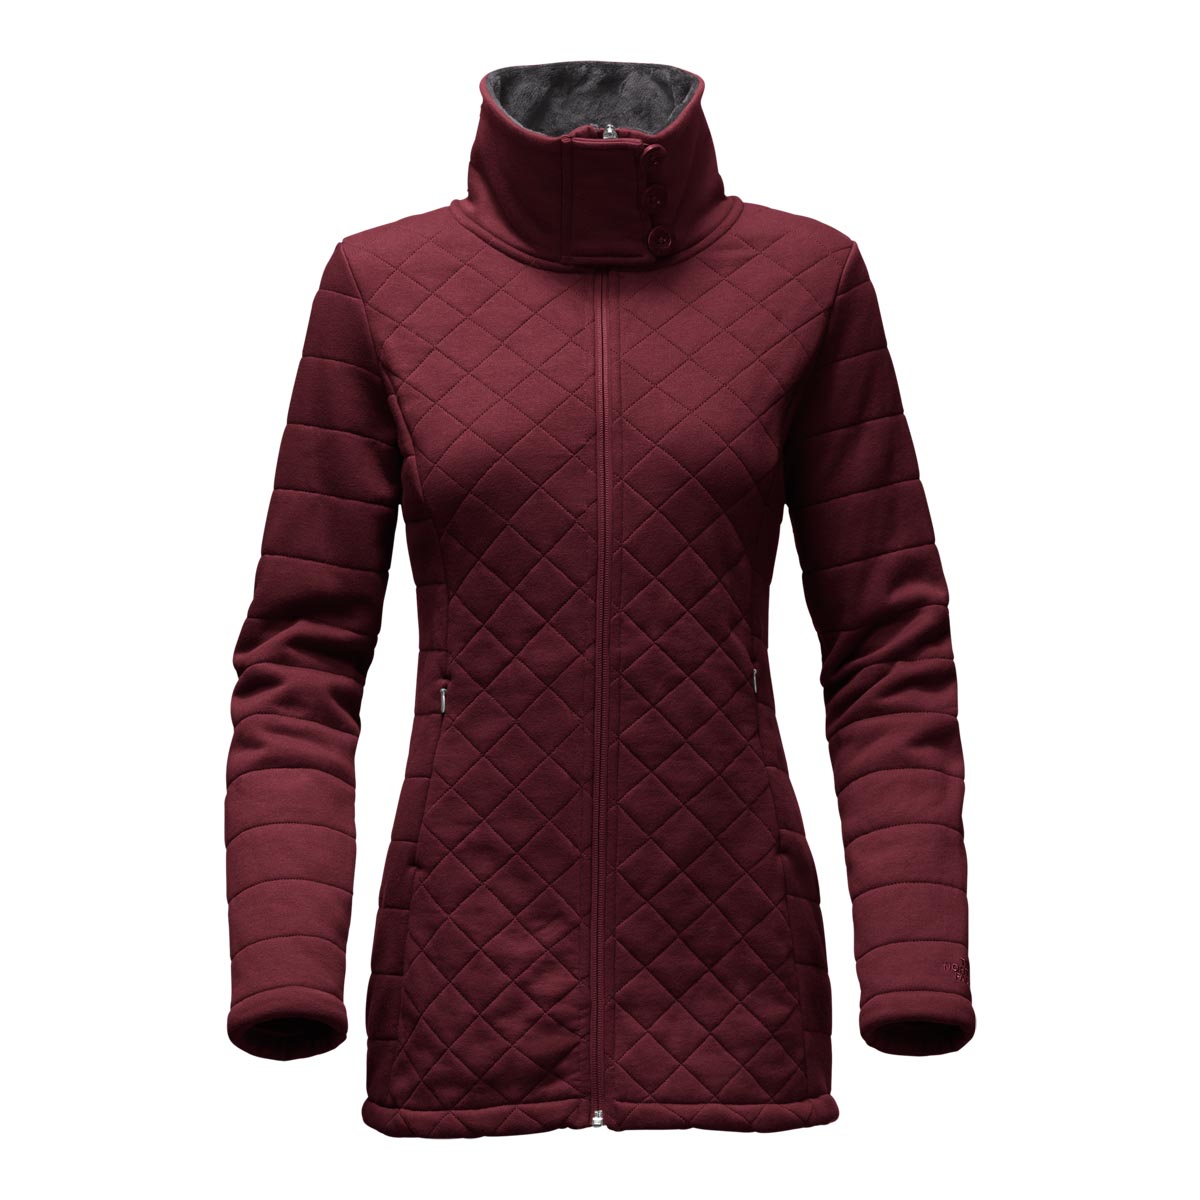 The North Face Women's Caroluna Jacket Discontinued Pricing